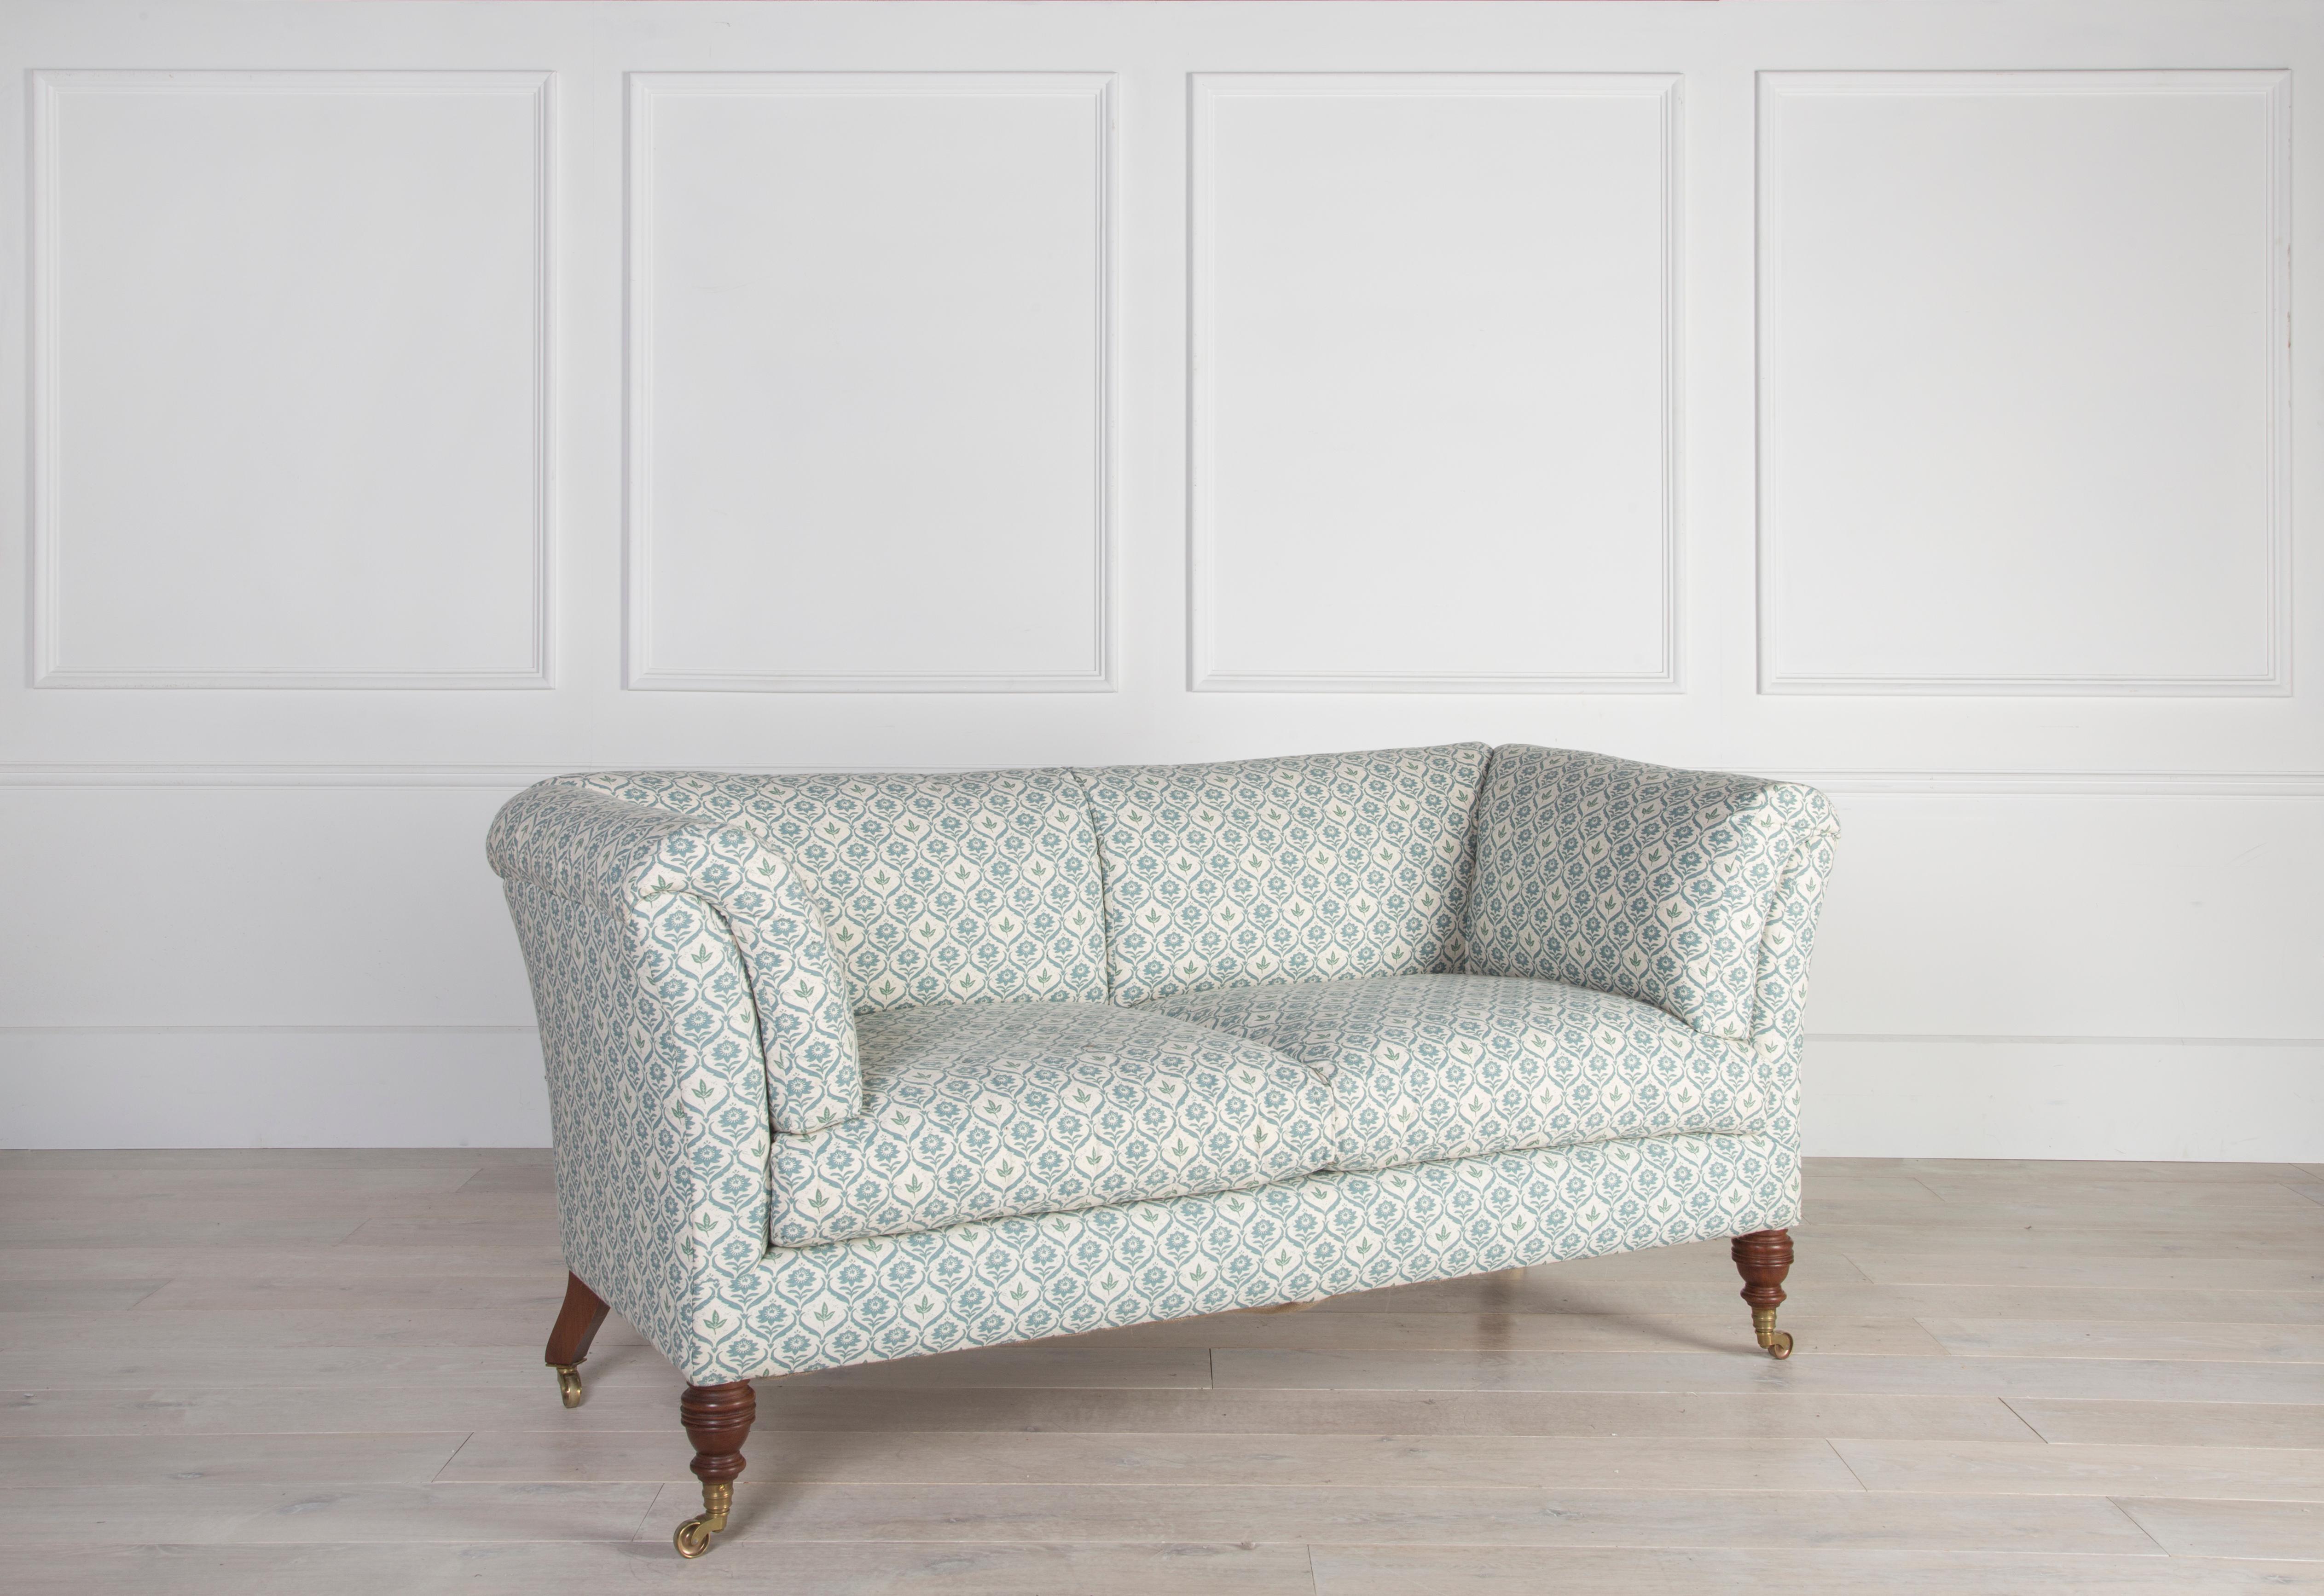 The Belmont sofa is based on the most elegant of the Howard & Son's models; The Baring. With a high down content in seat, back, and arm cushions, this sofa is the perfect mix of timeless design and comfort.

We build our Belmont up from a hardwood